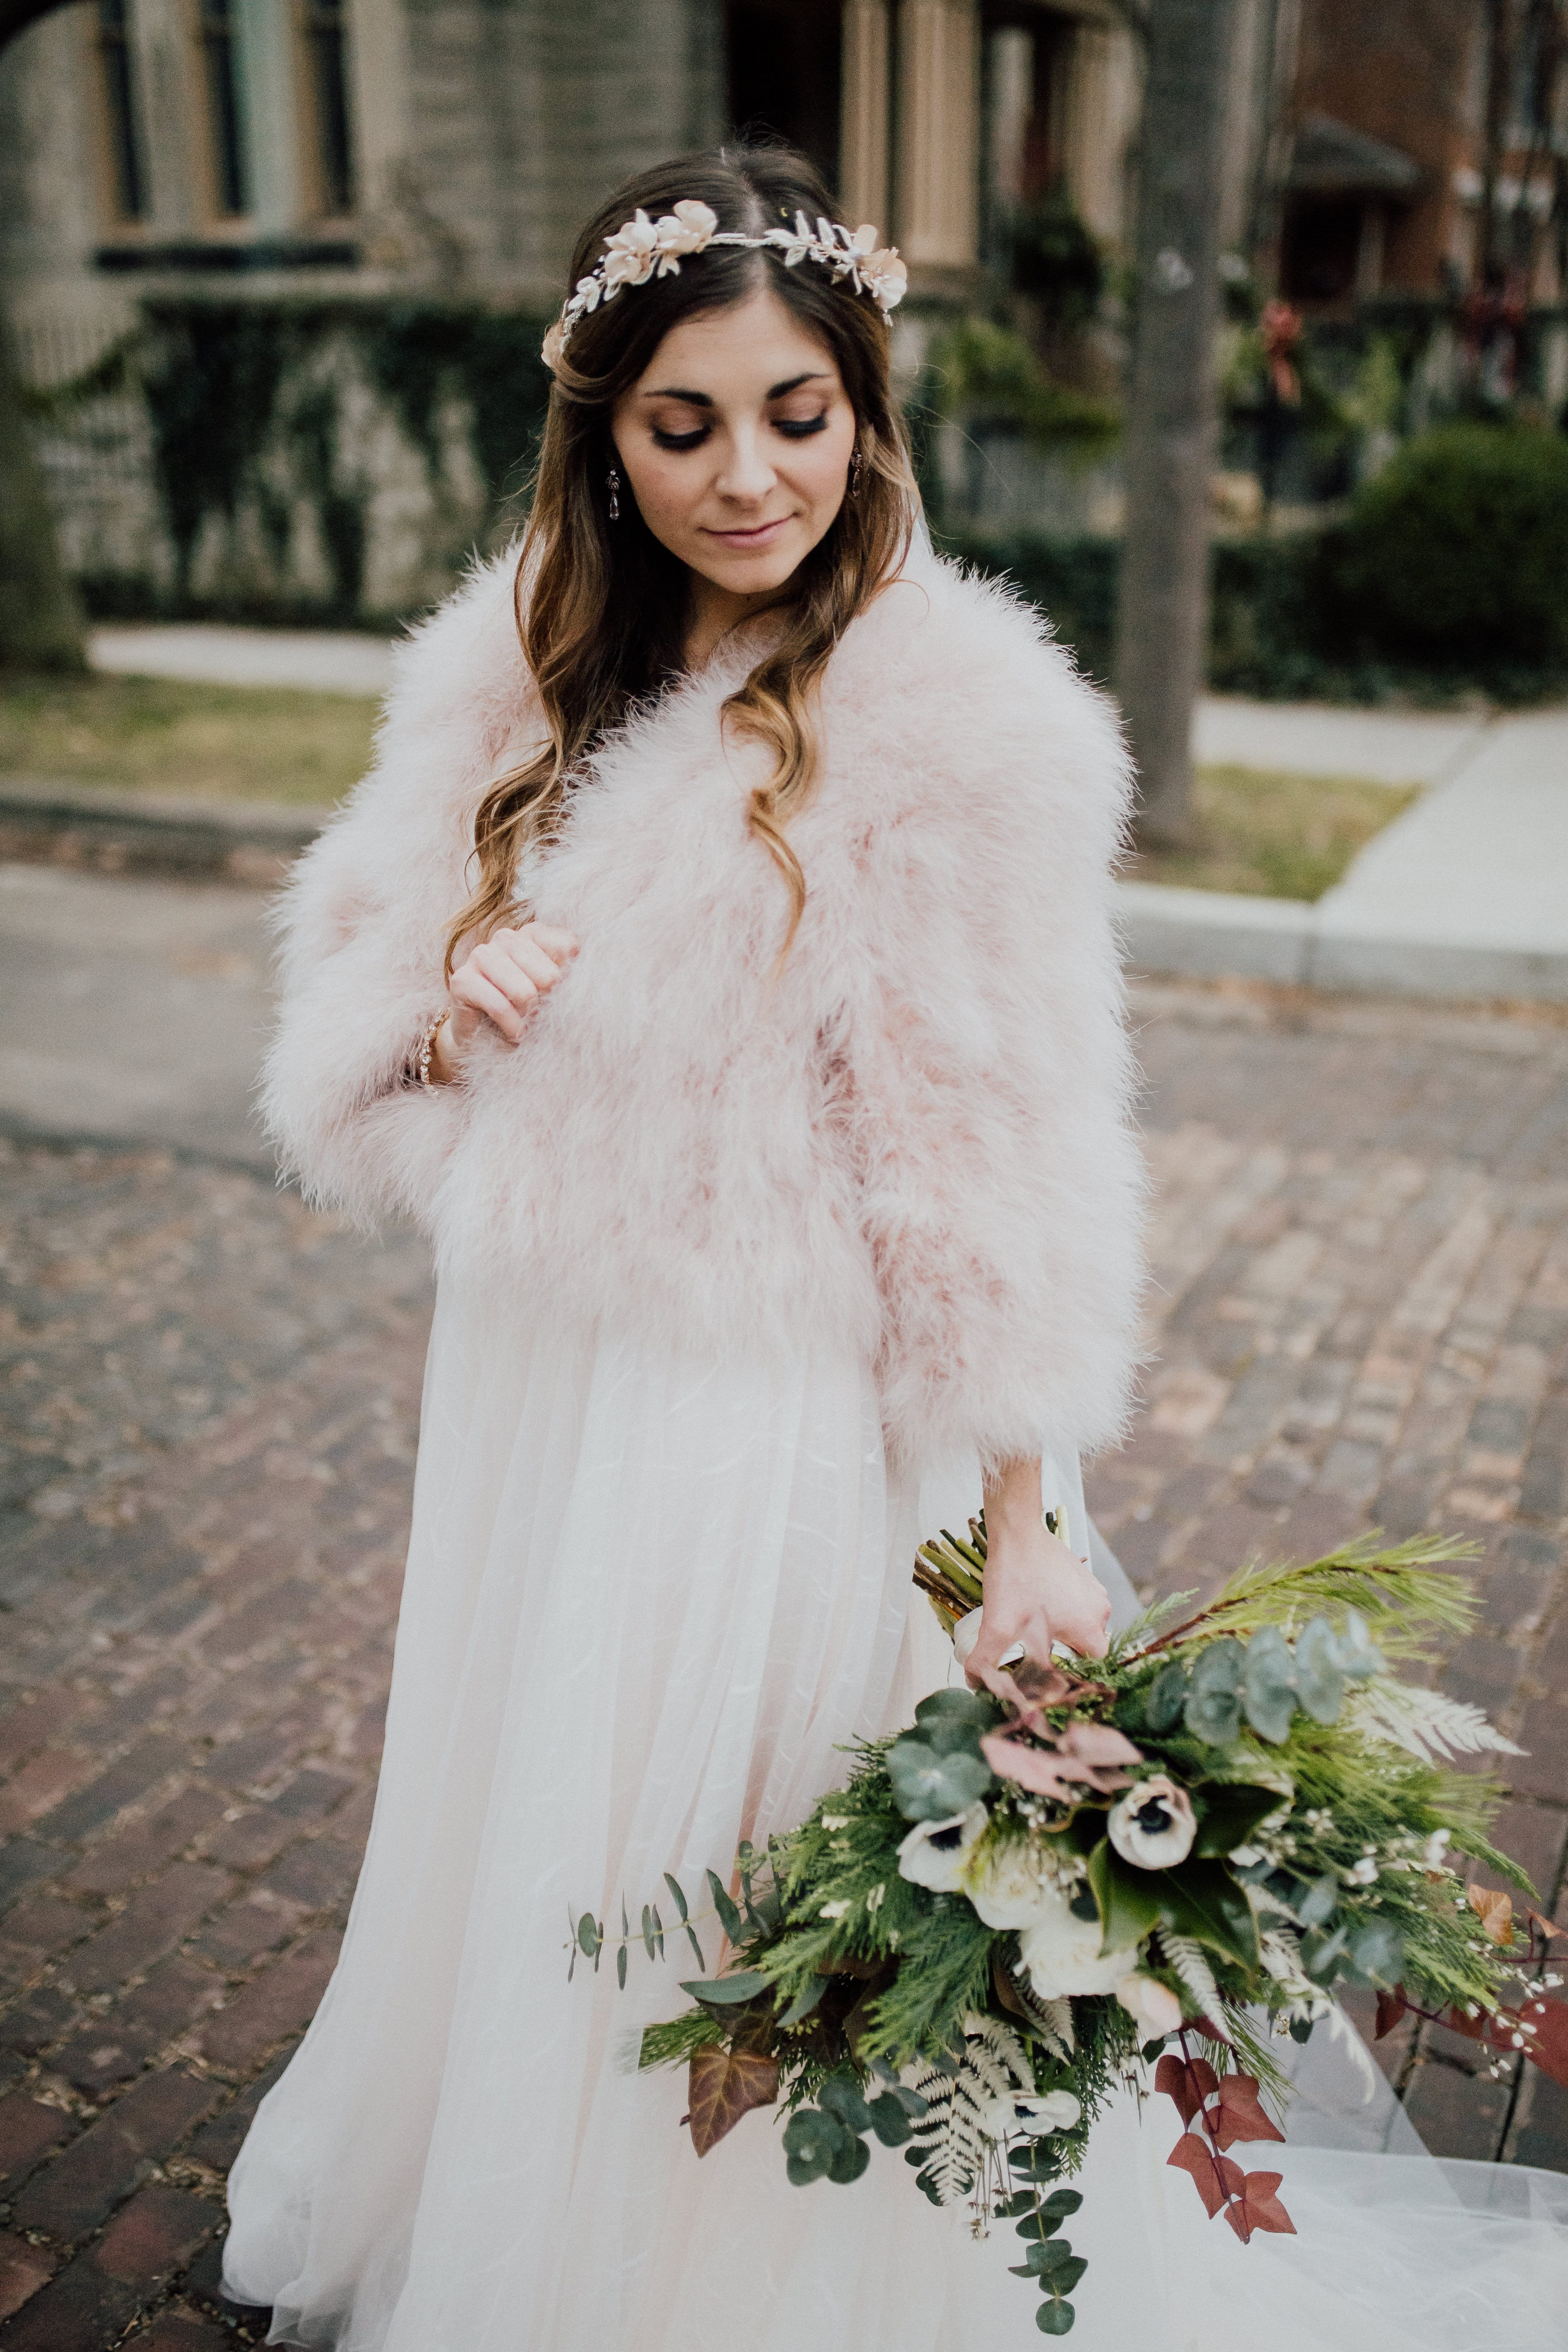 Bride poses with wedding flowers